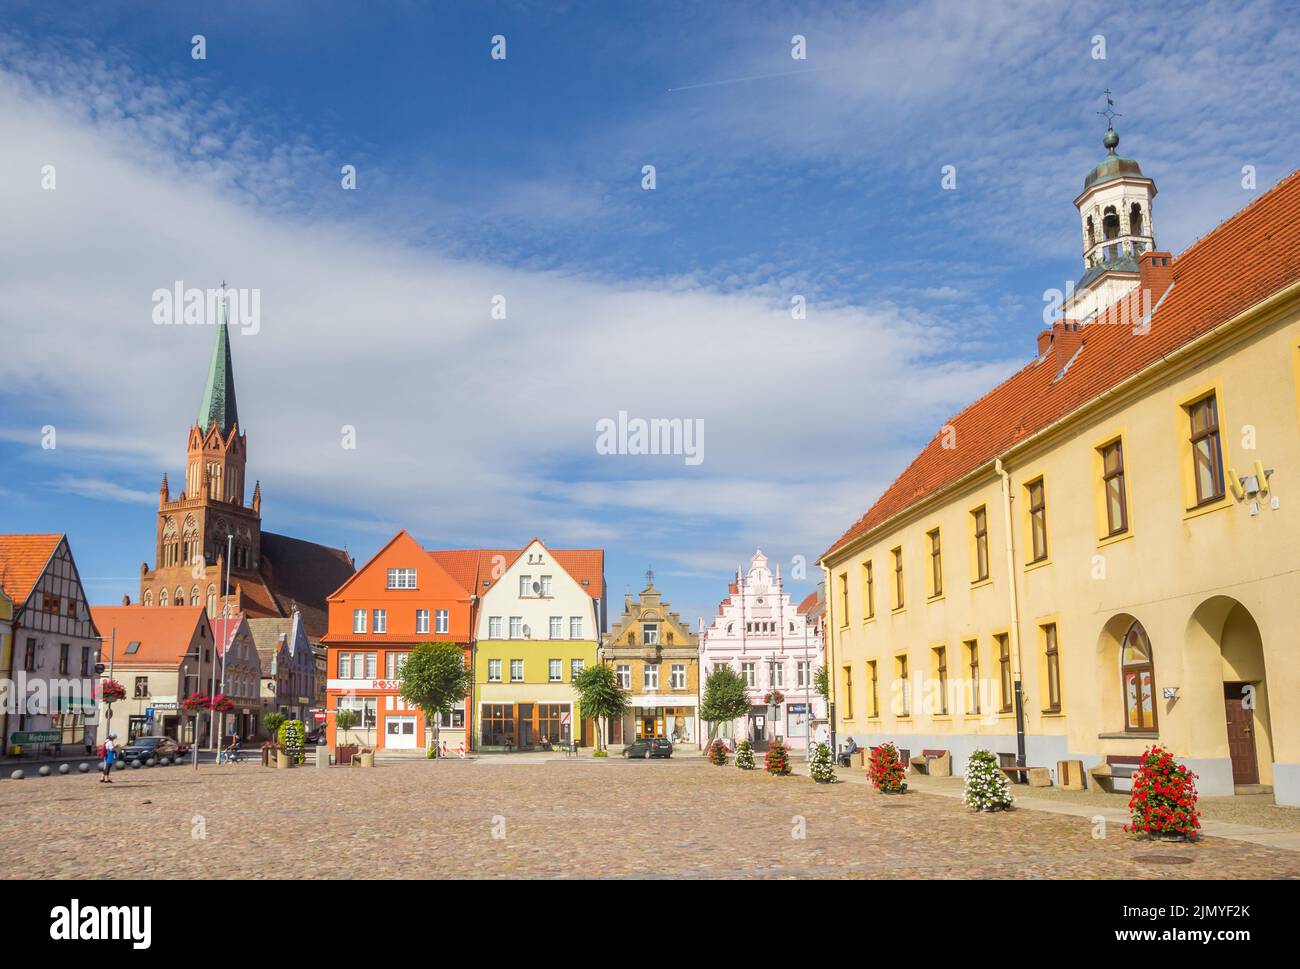 Historic buildings on the central market square of Trzebiatow, Poland Stock Photo